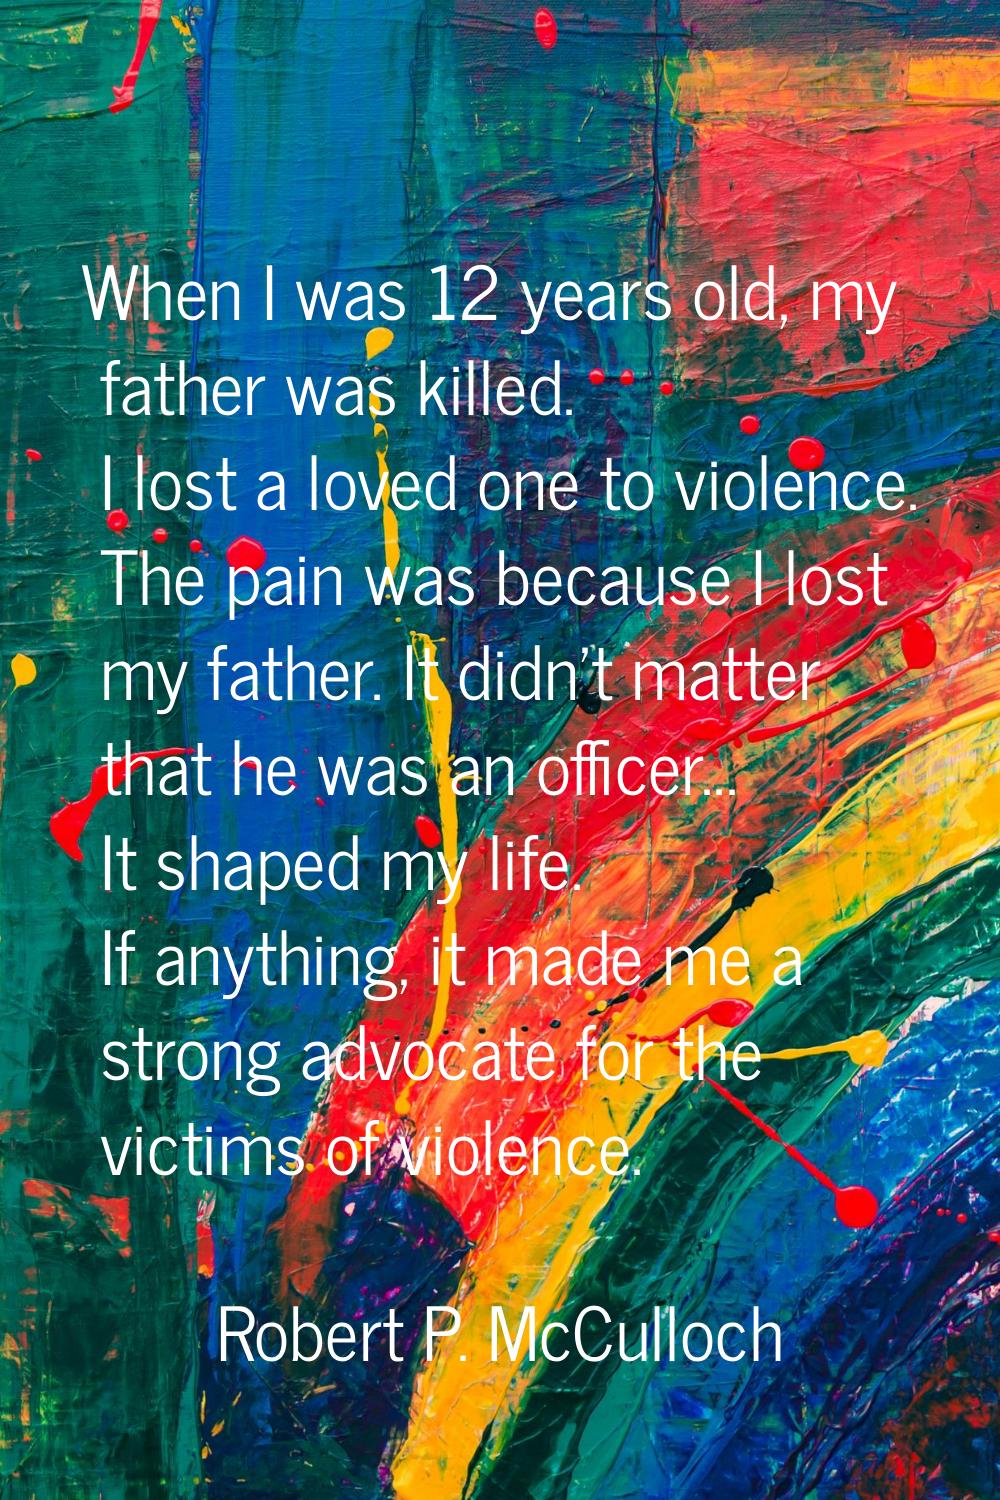 When I was 12 years old, my father was killed. I lost a loved one to violence. The pain was because